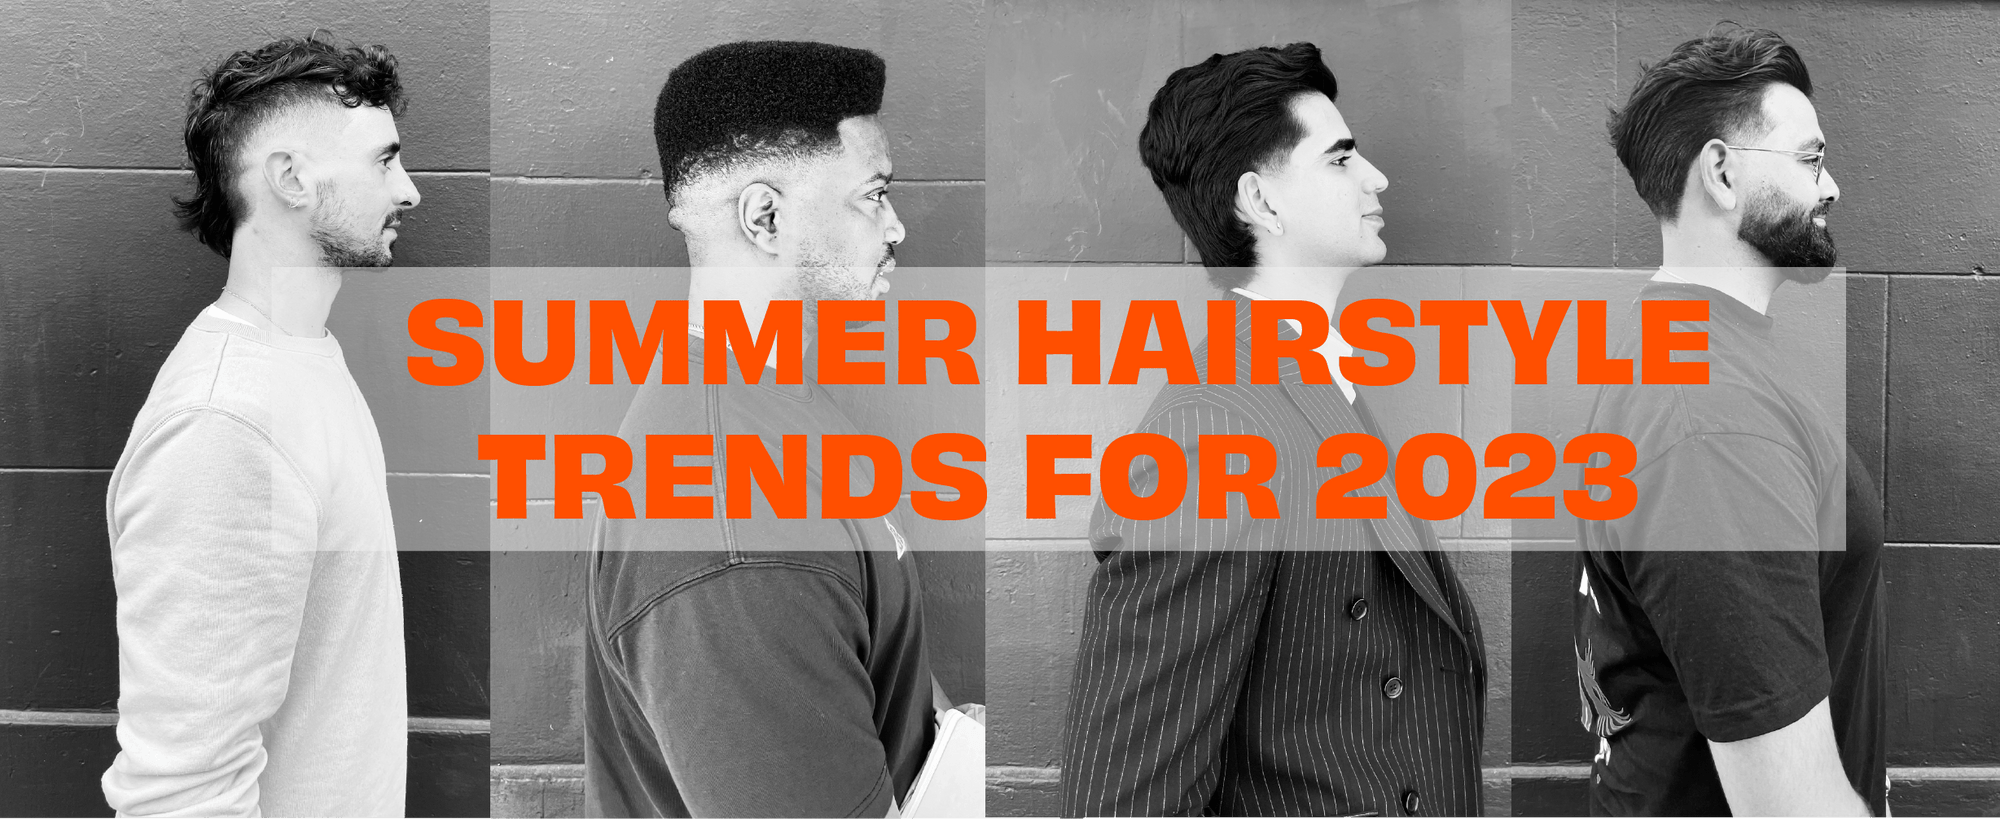 The Summer Haircut That Every Man Should Try | GQ